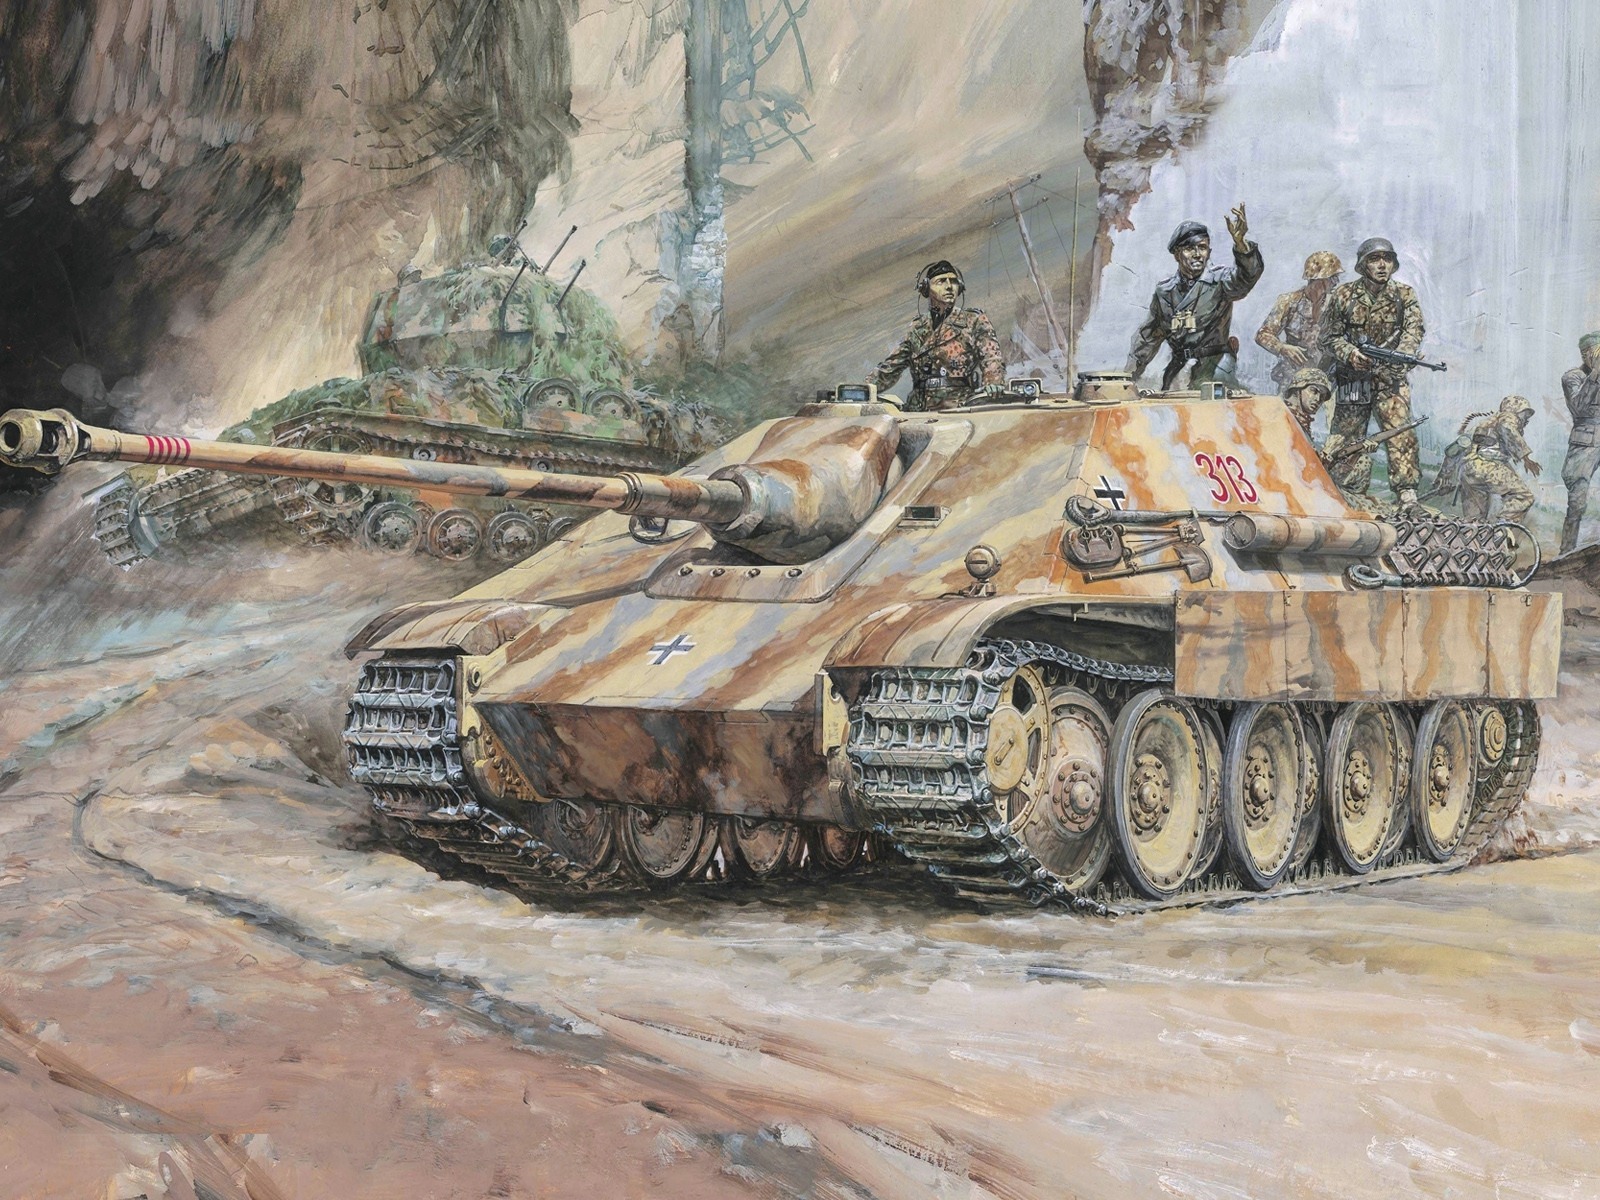 Military tanks, armored HD painting wallpapers #4 - 1600x1200